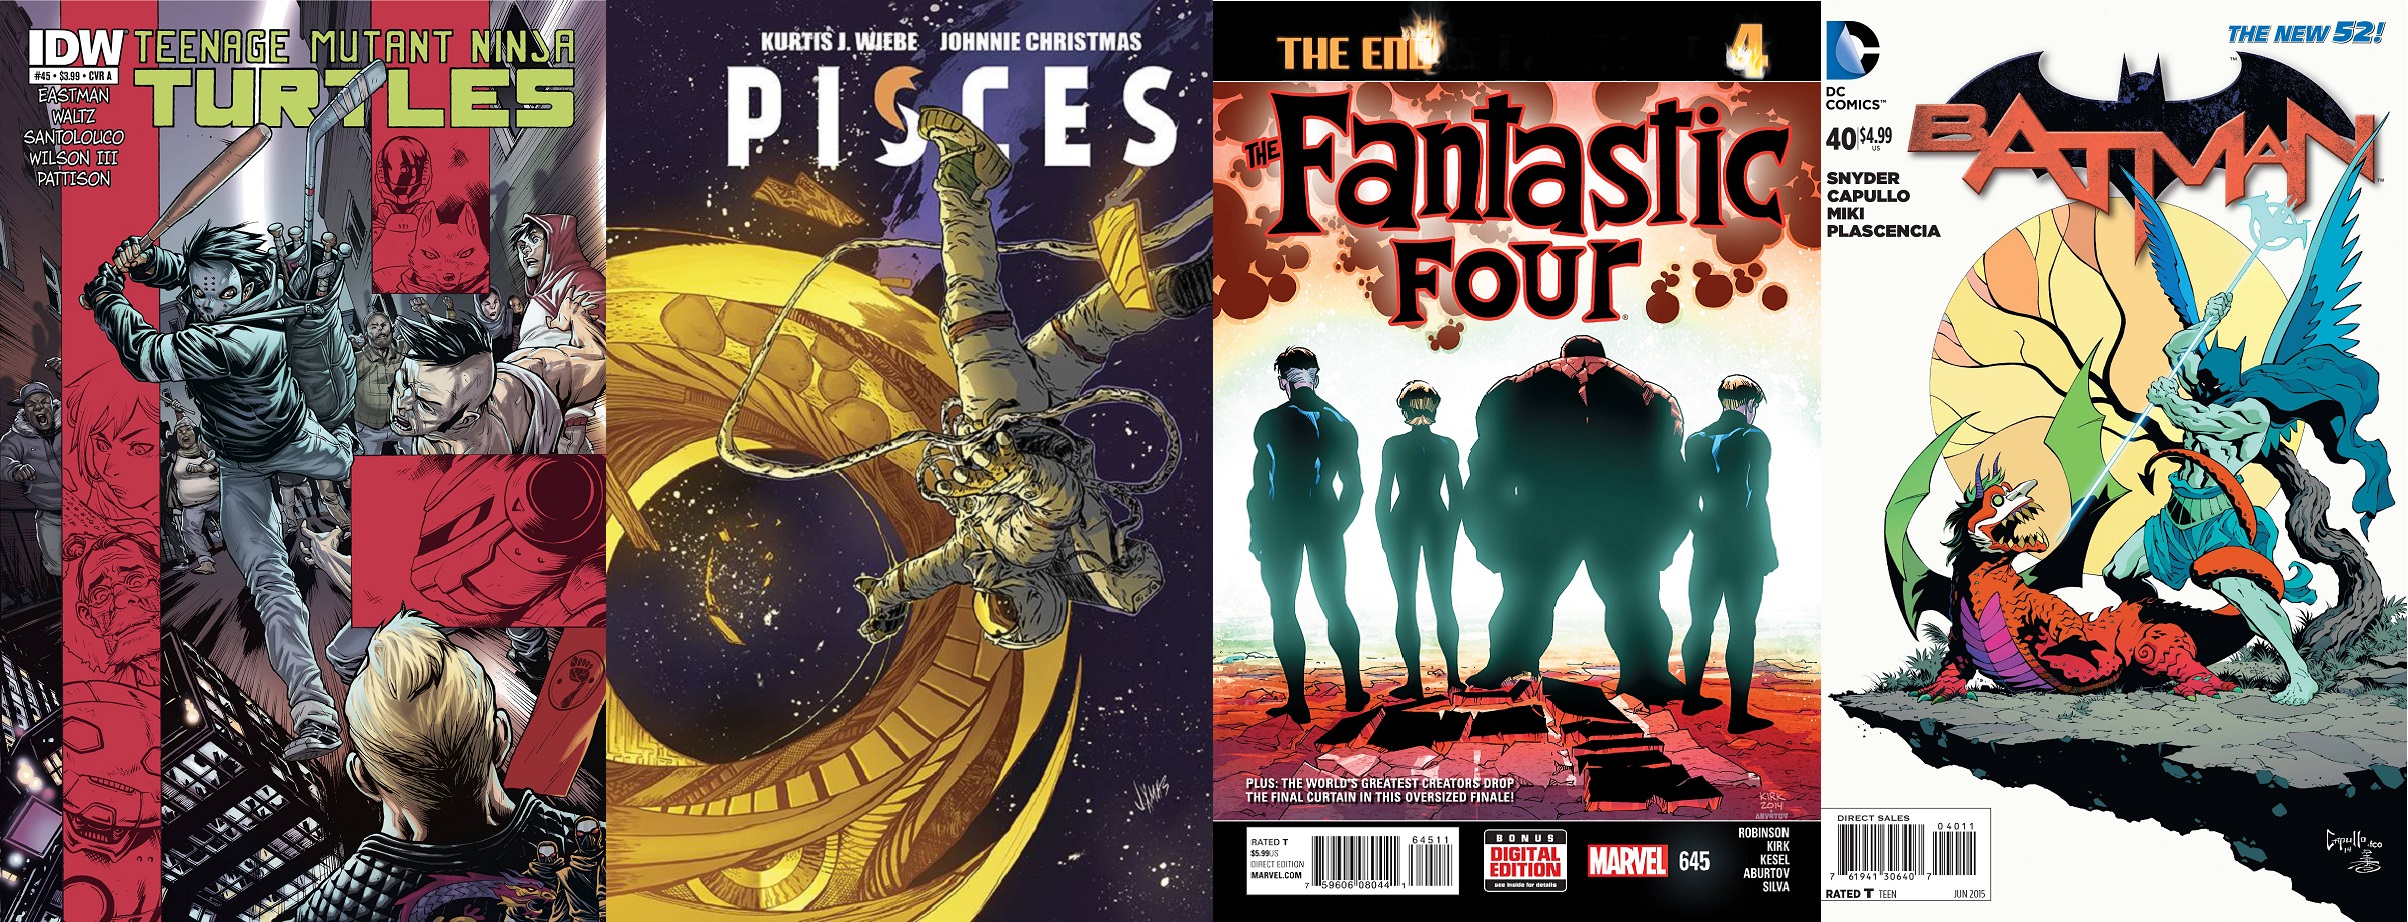 New Comics Releases For April 29, 2015